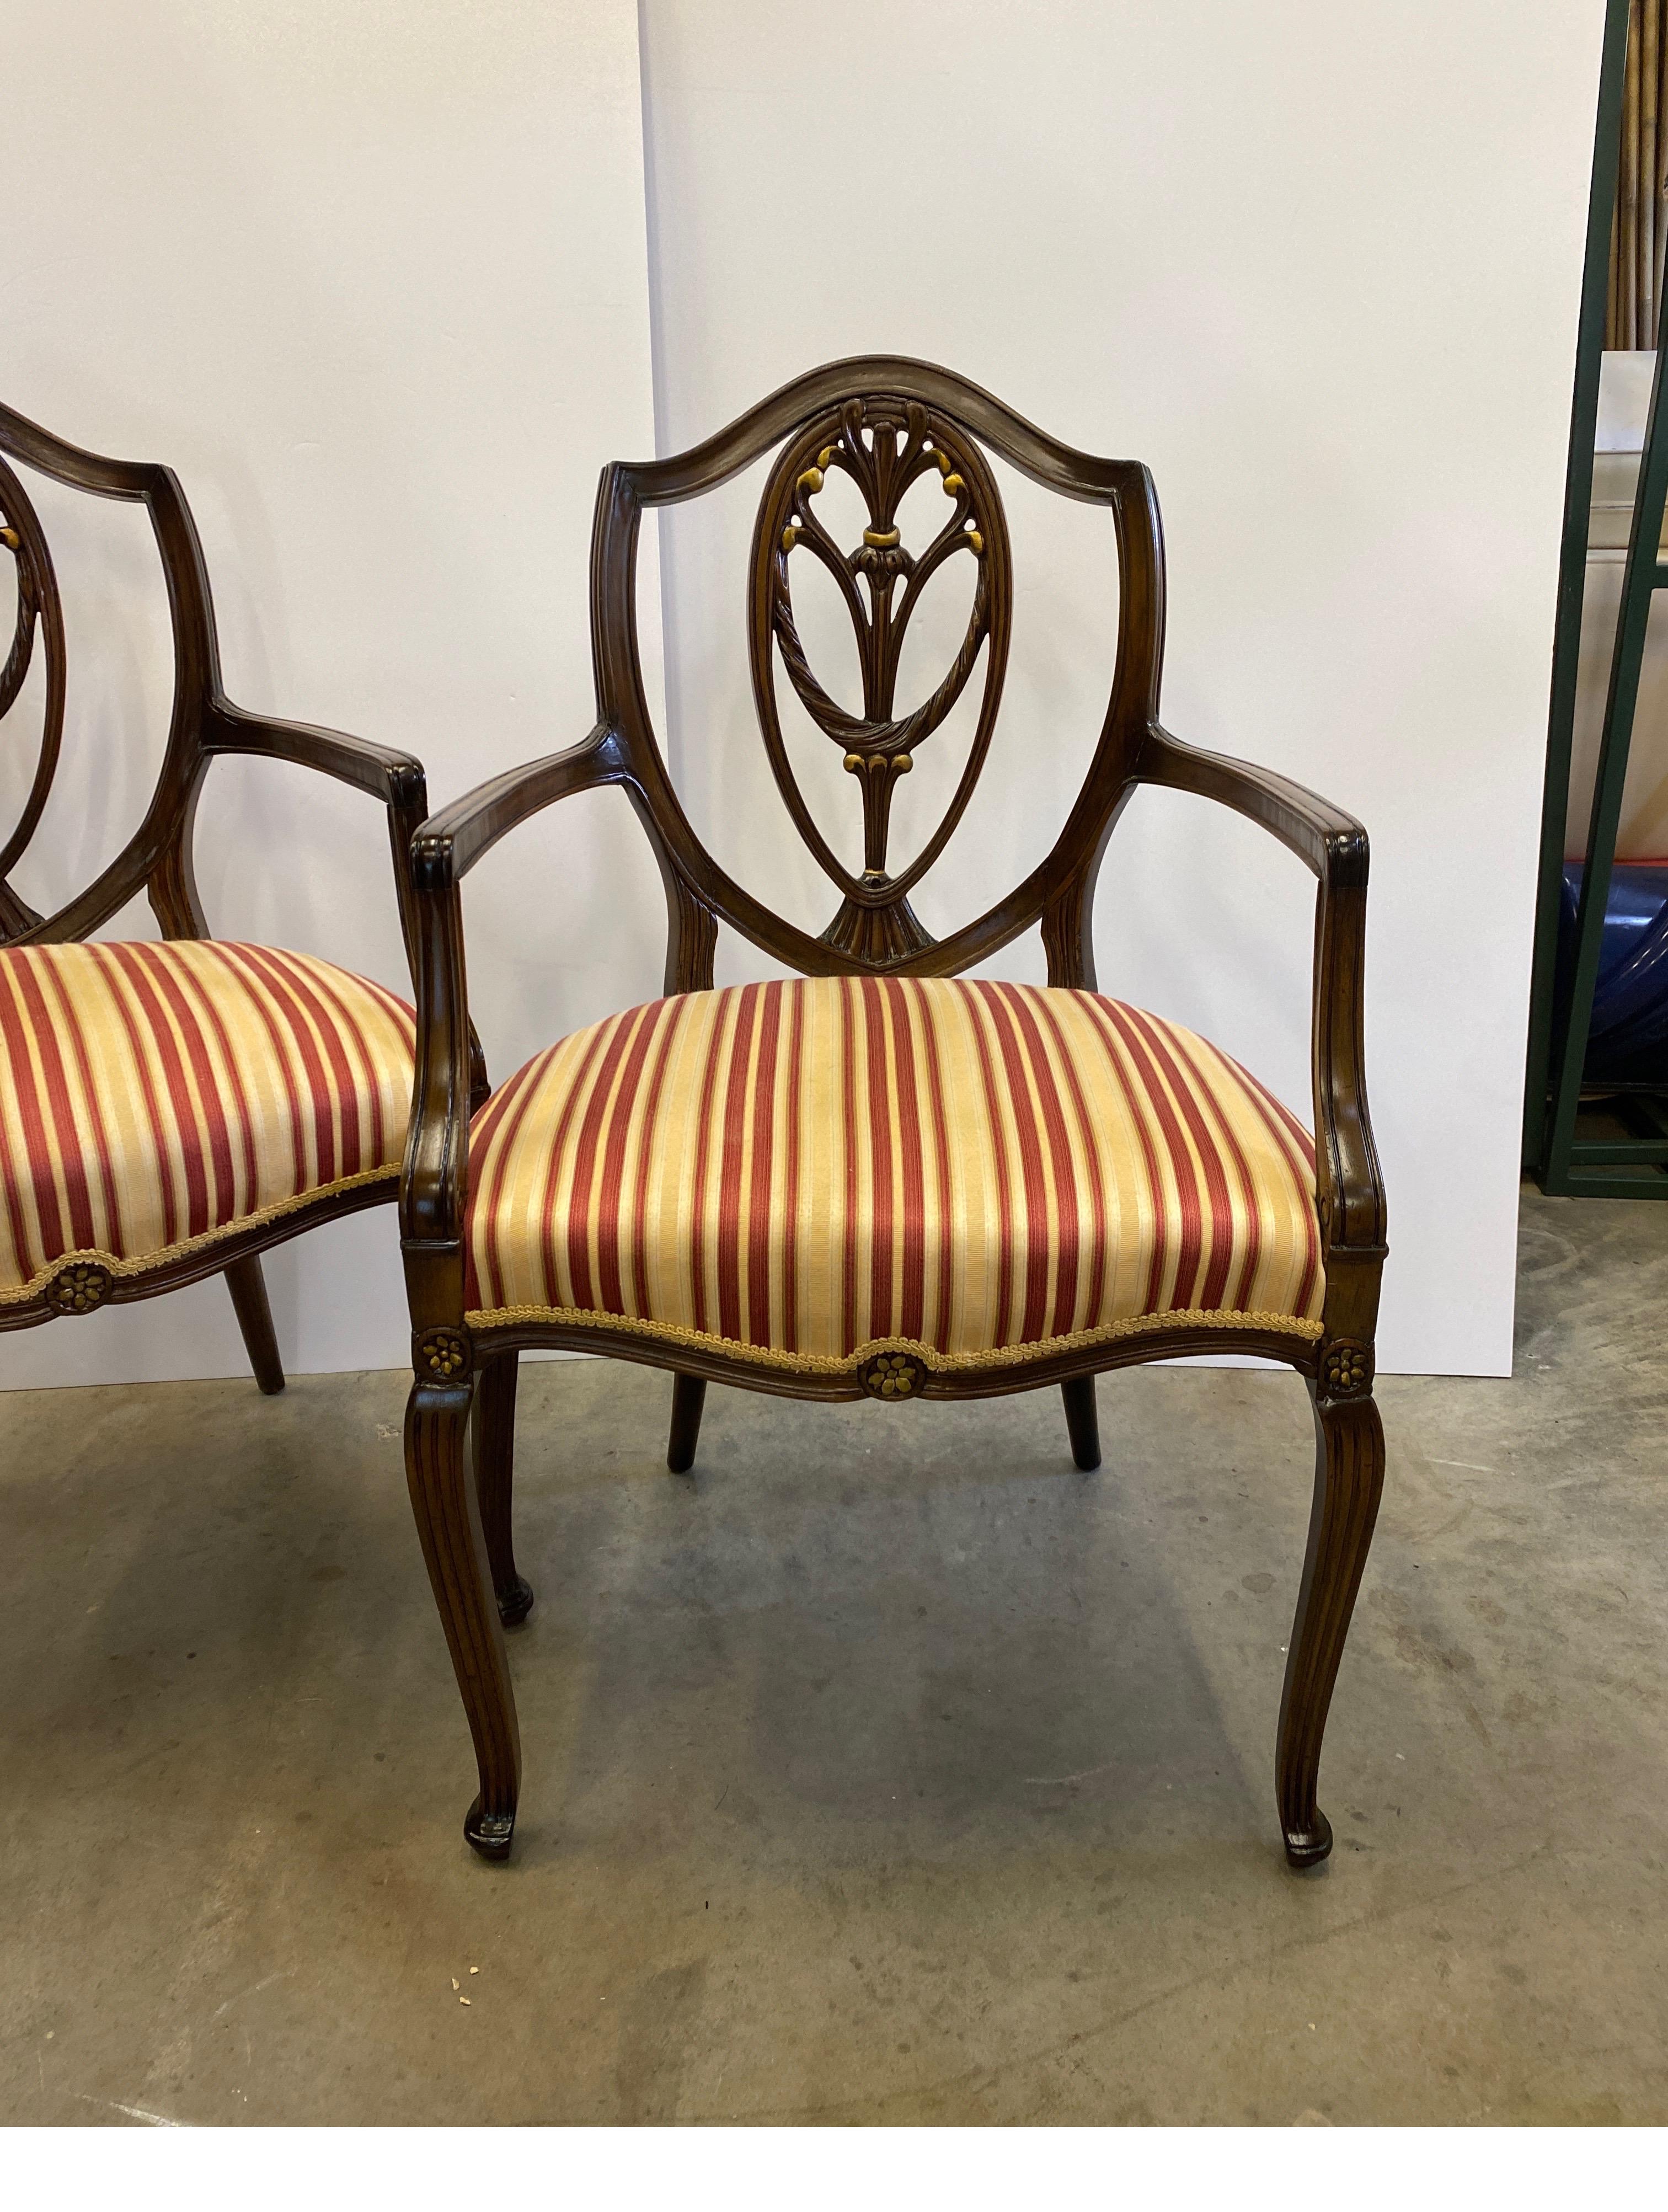 A graceful pair of hand carved mahogany Hepplewhite shield back armchairs. The backs with pierced shields with swags and gilt accents in the Prince of Whales motif with striped ribbon pattern satin seats in red, gold and cream. The front legs gently